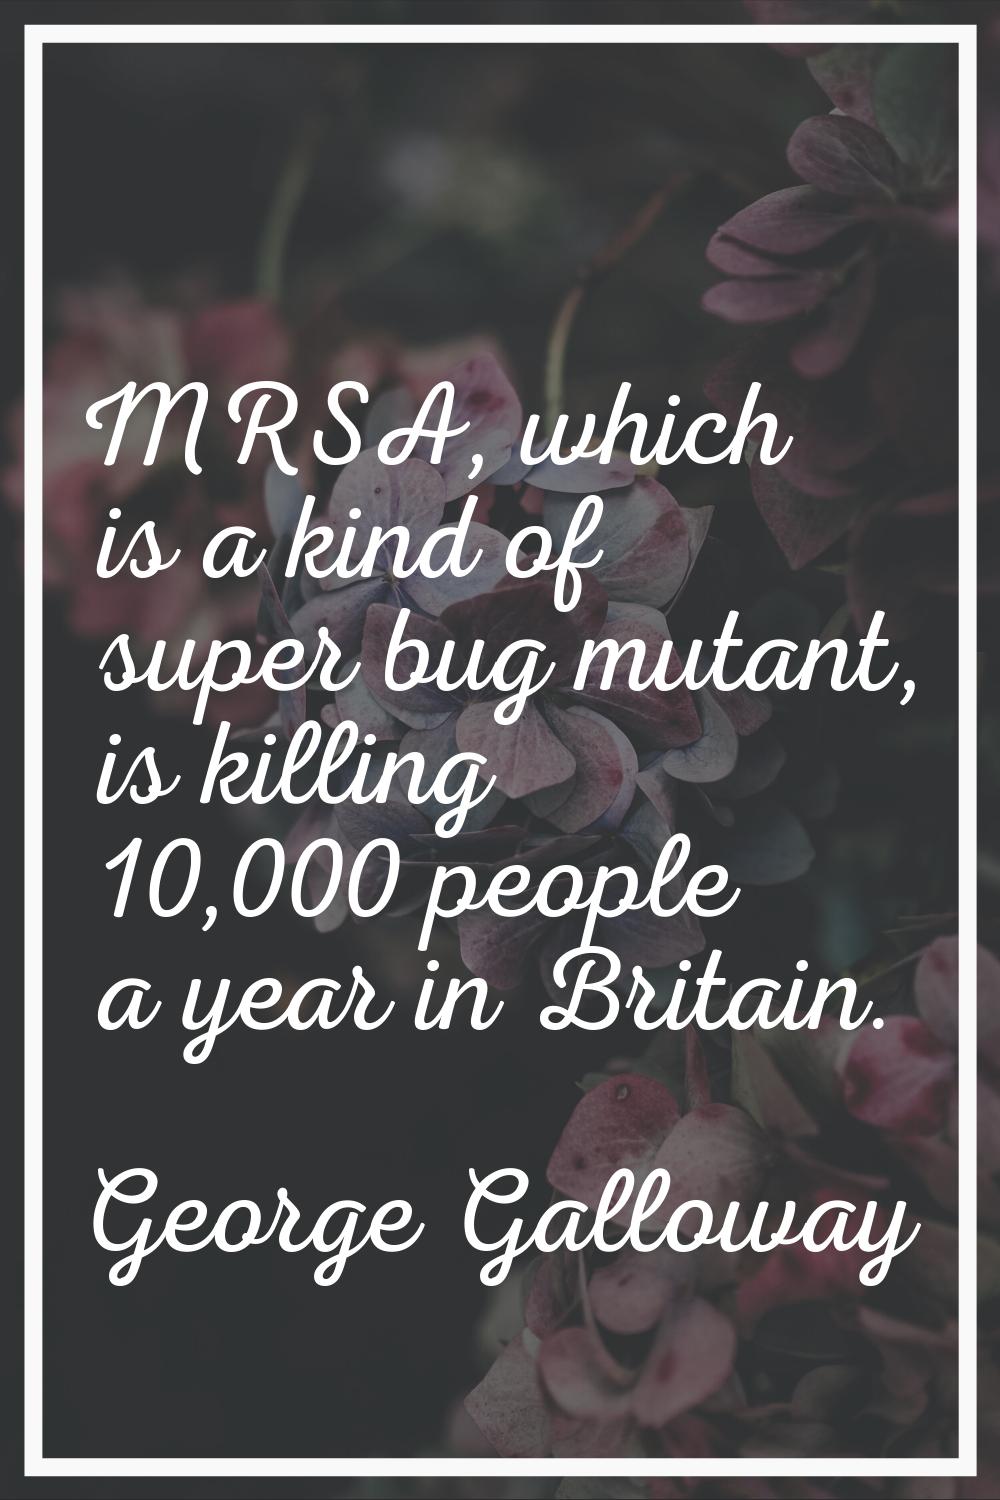 MRSA, which is a kind of super bug mutant, is killing 10,000 people a year in Britain.